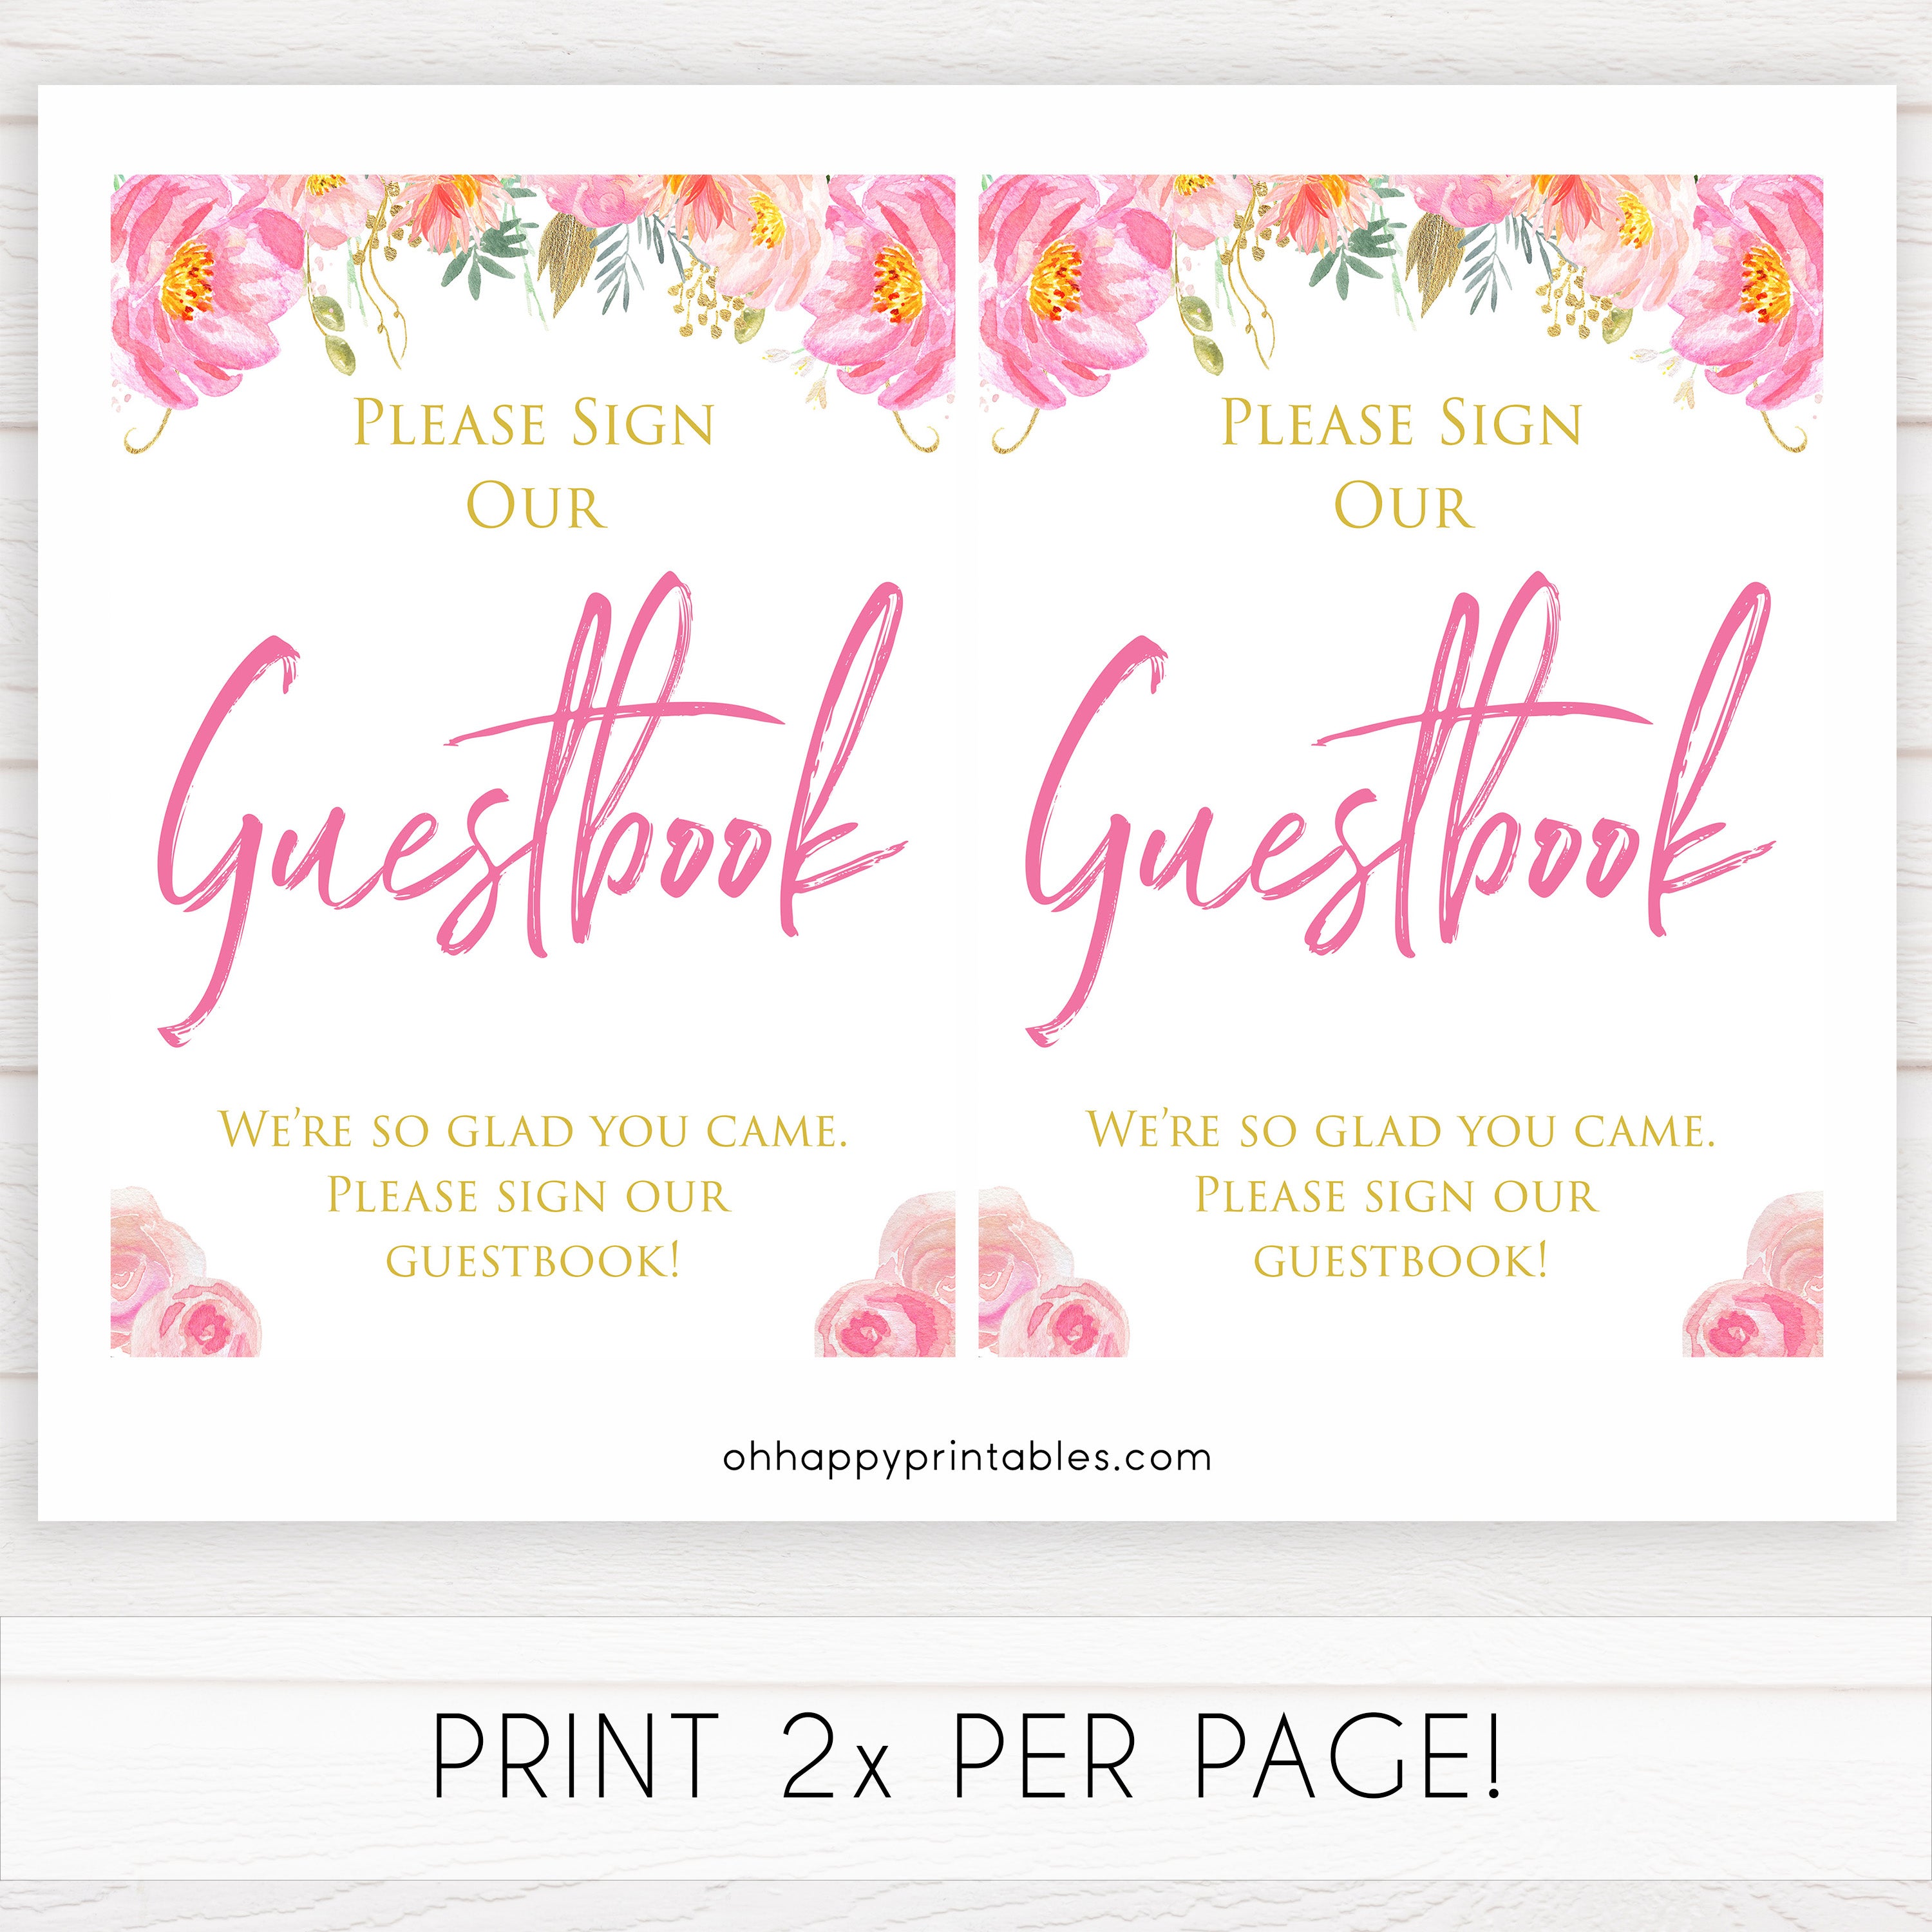 guestbook baby table signs, guestbook baby signs, Blush floral baby decor, printable baby table signs, printable baby decor, gold table signs, fun baby signs, floral fun baby table signs